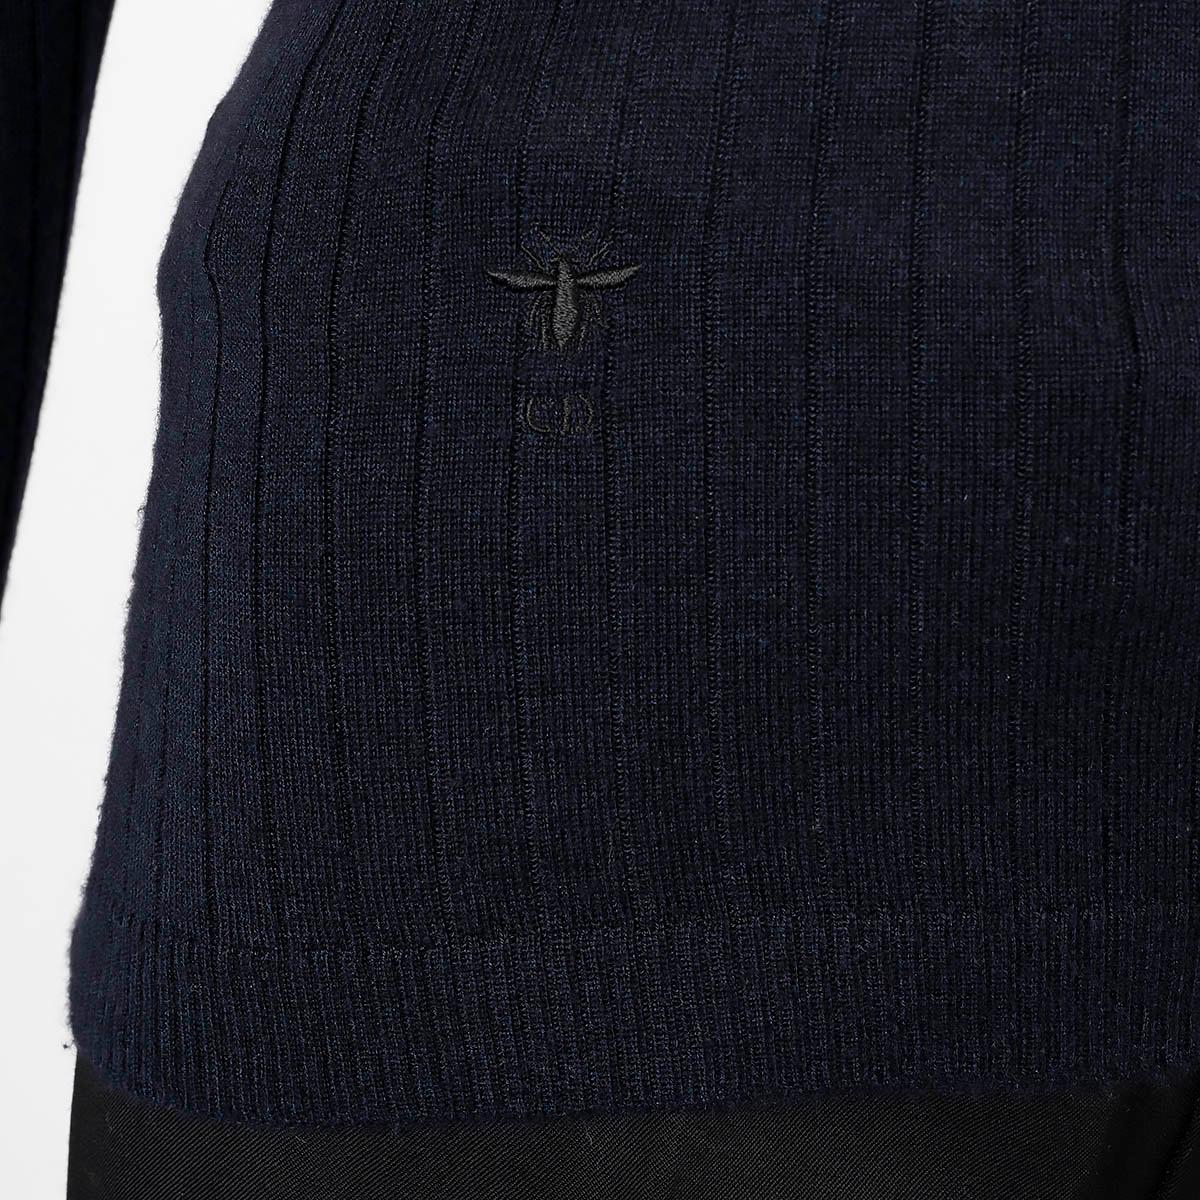 CHRISTIAN DIOR navy blue cashmere RIB-KNIT TURTLENECK Sweater S For Sale 2